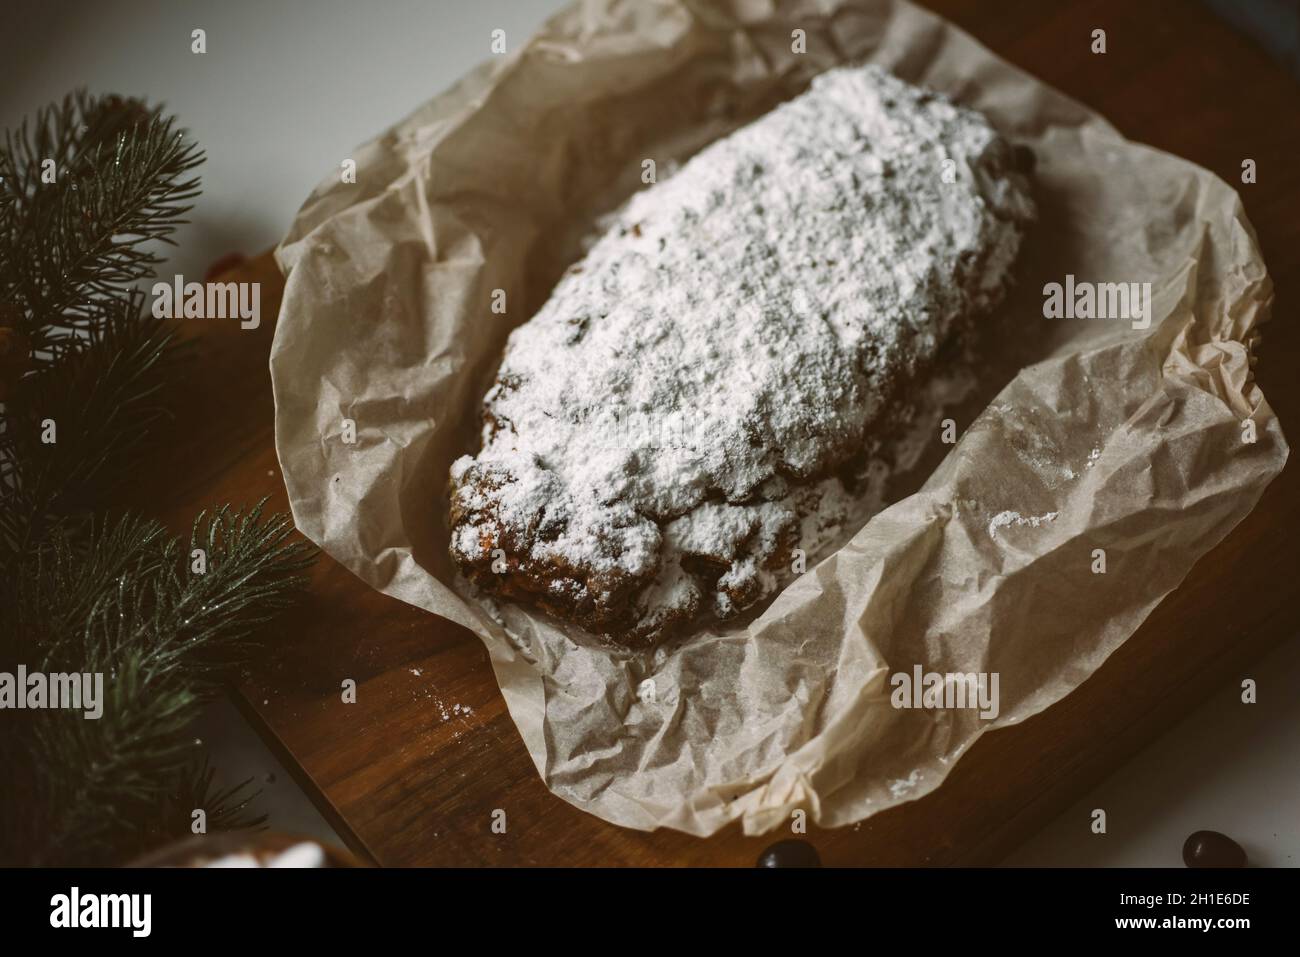 Appetizing Christmas pastries, stollen on a wooden board with Christmas decor Stock Photo